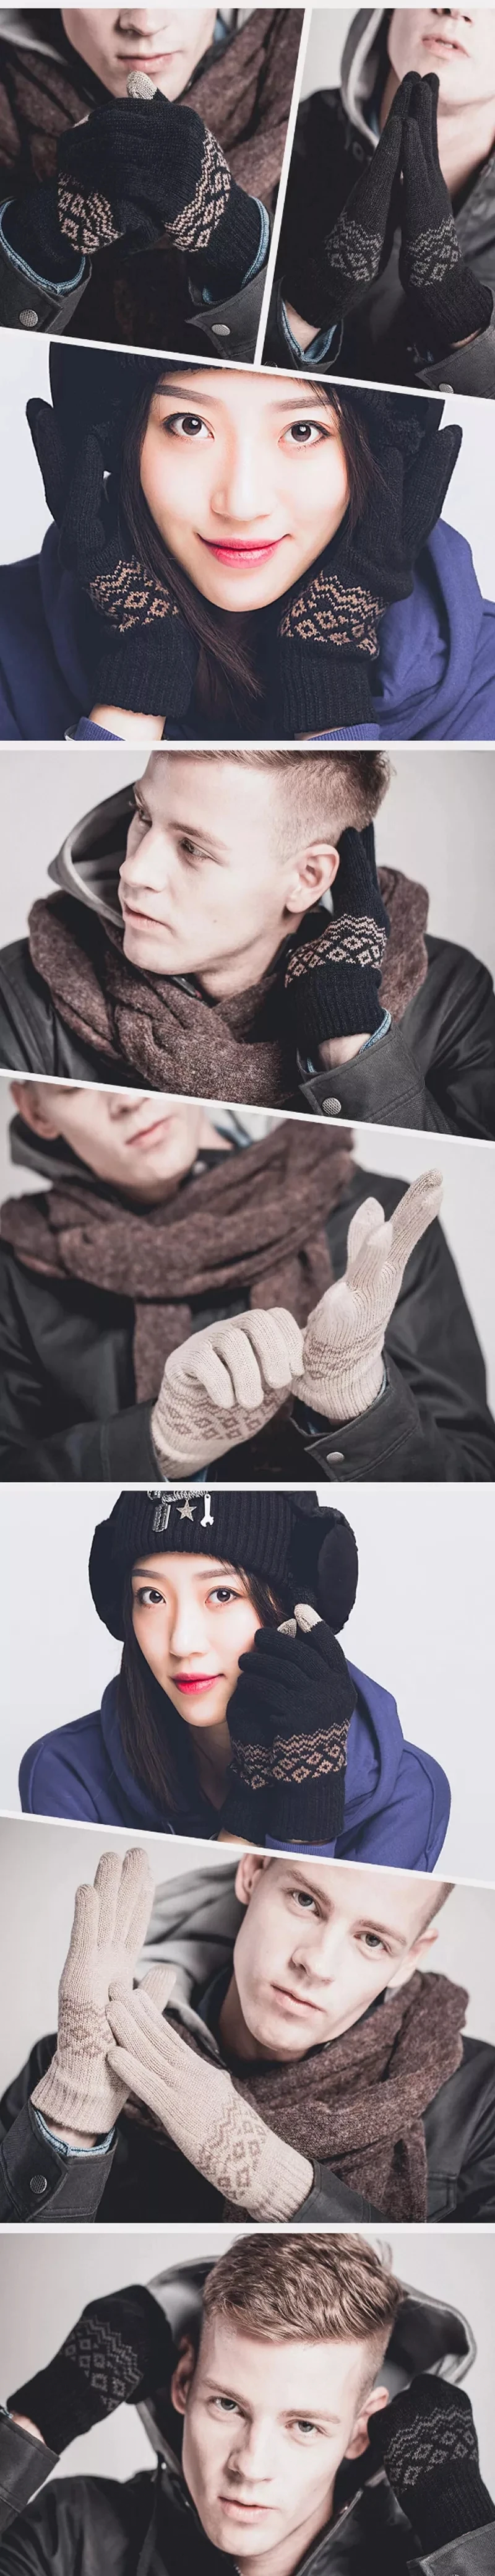 New Xiaomi Mijia Youpin FO touch screen warm velvet gloves Plus velvet to keep warm finger touch screen for winter